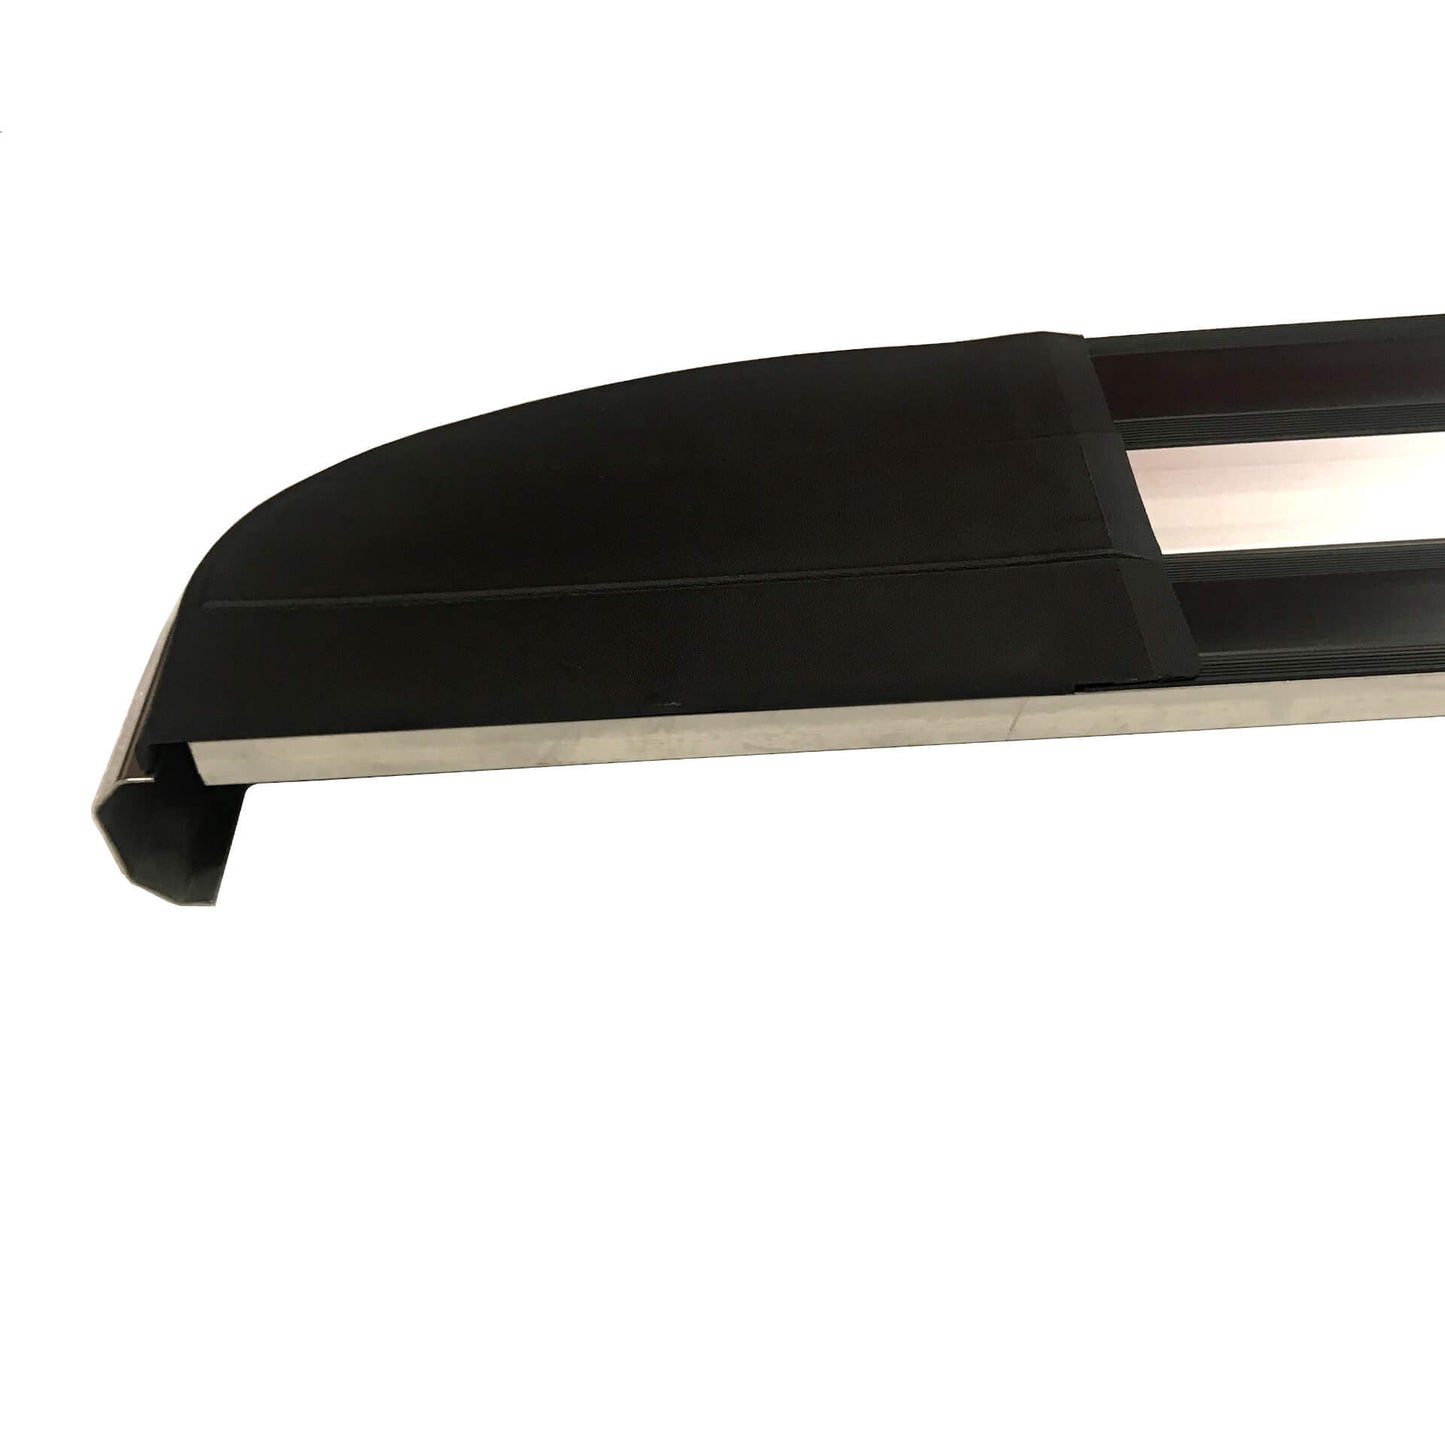 Panther Side Steps Running Boards for Mitsubishi L200 Double Cab 1996-2005 -  - sold by Direct4x4